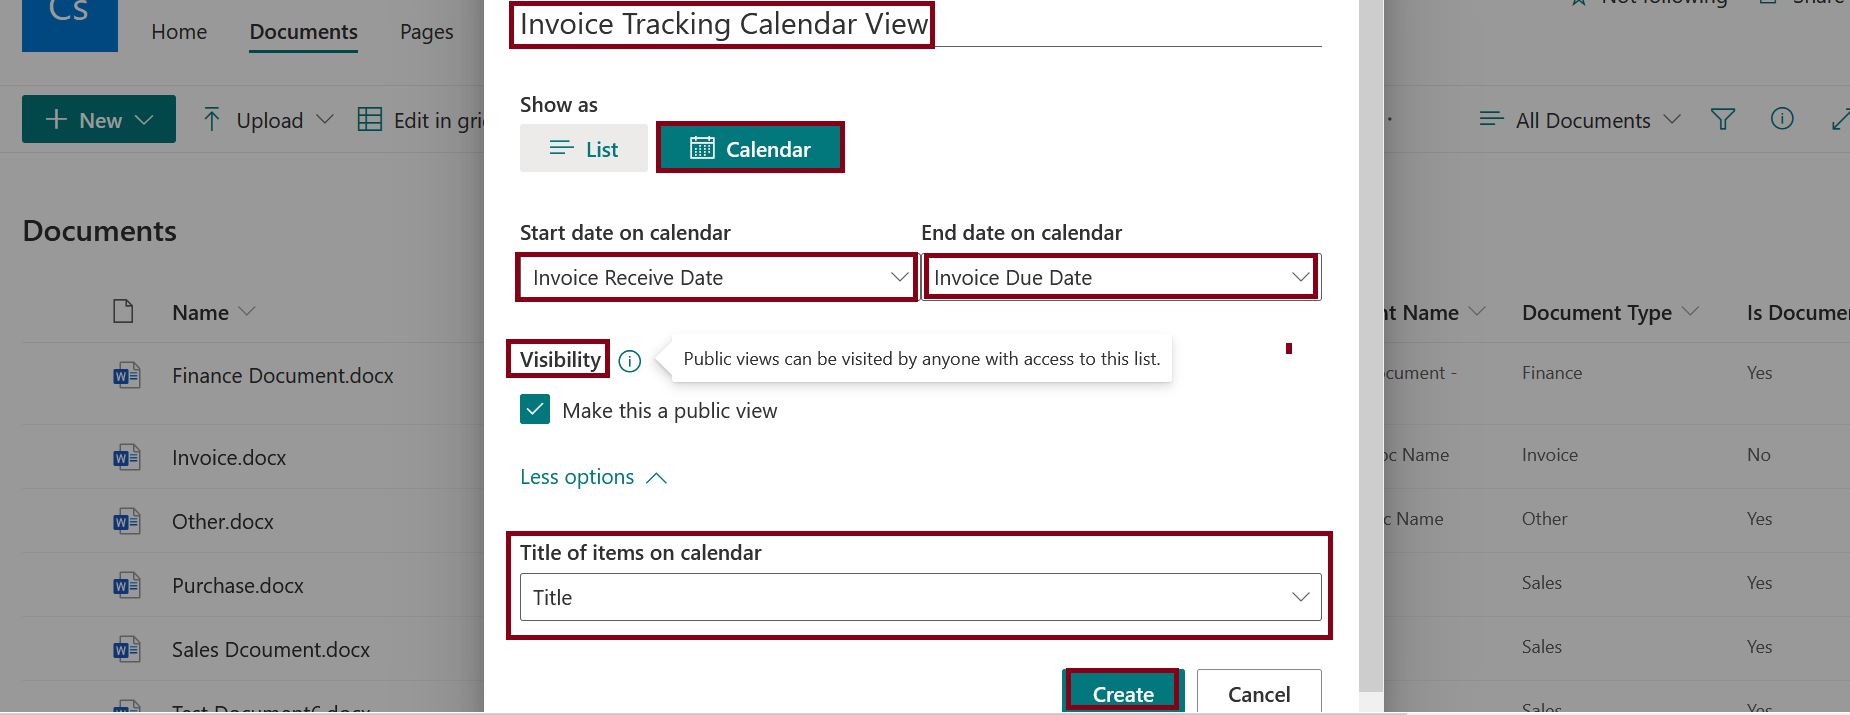 Visibility settings in calendar view creation - modern SharePoint Online list-library